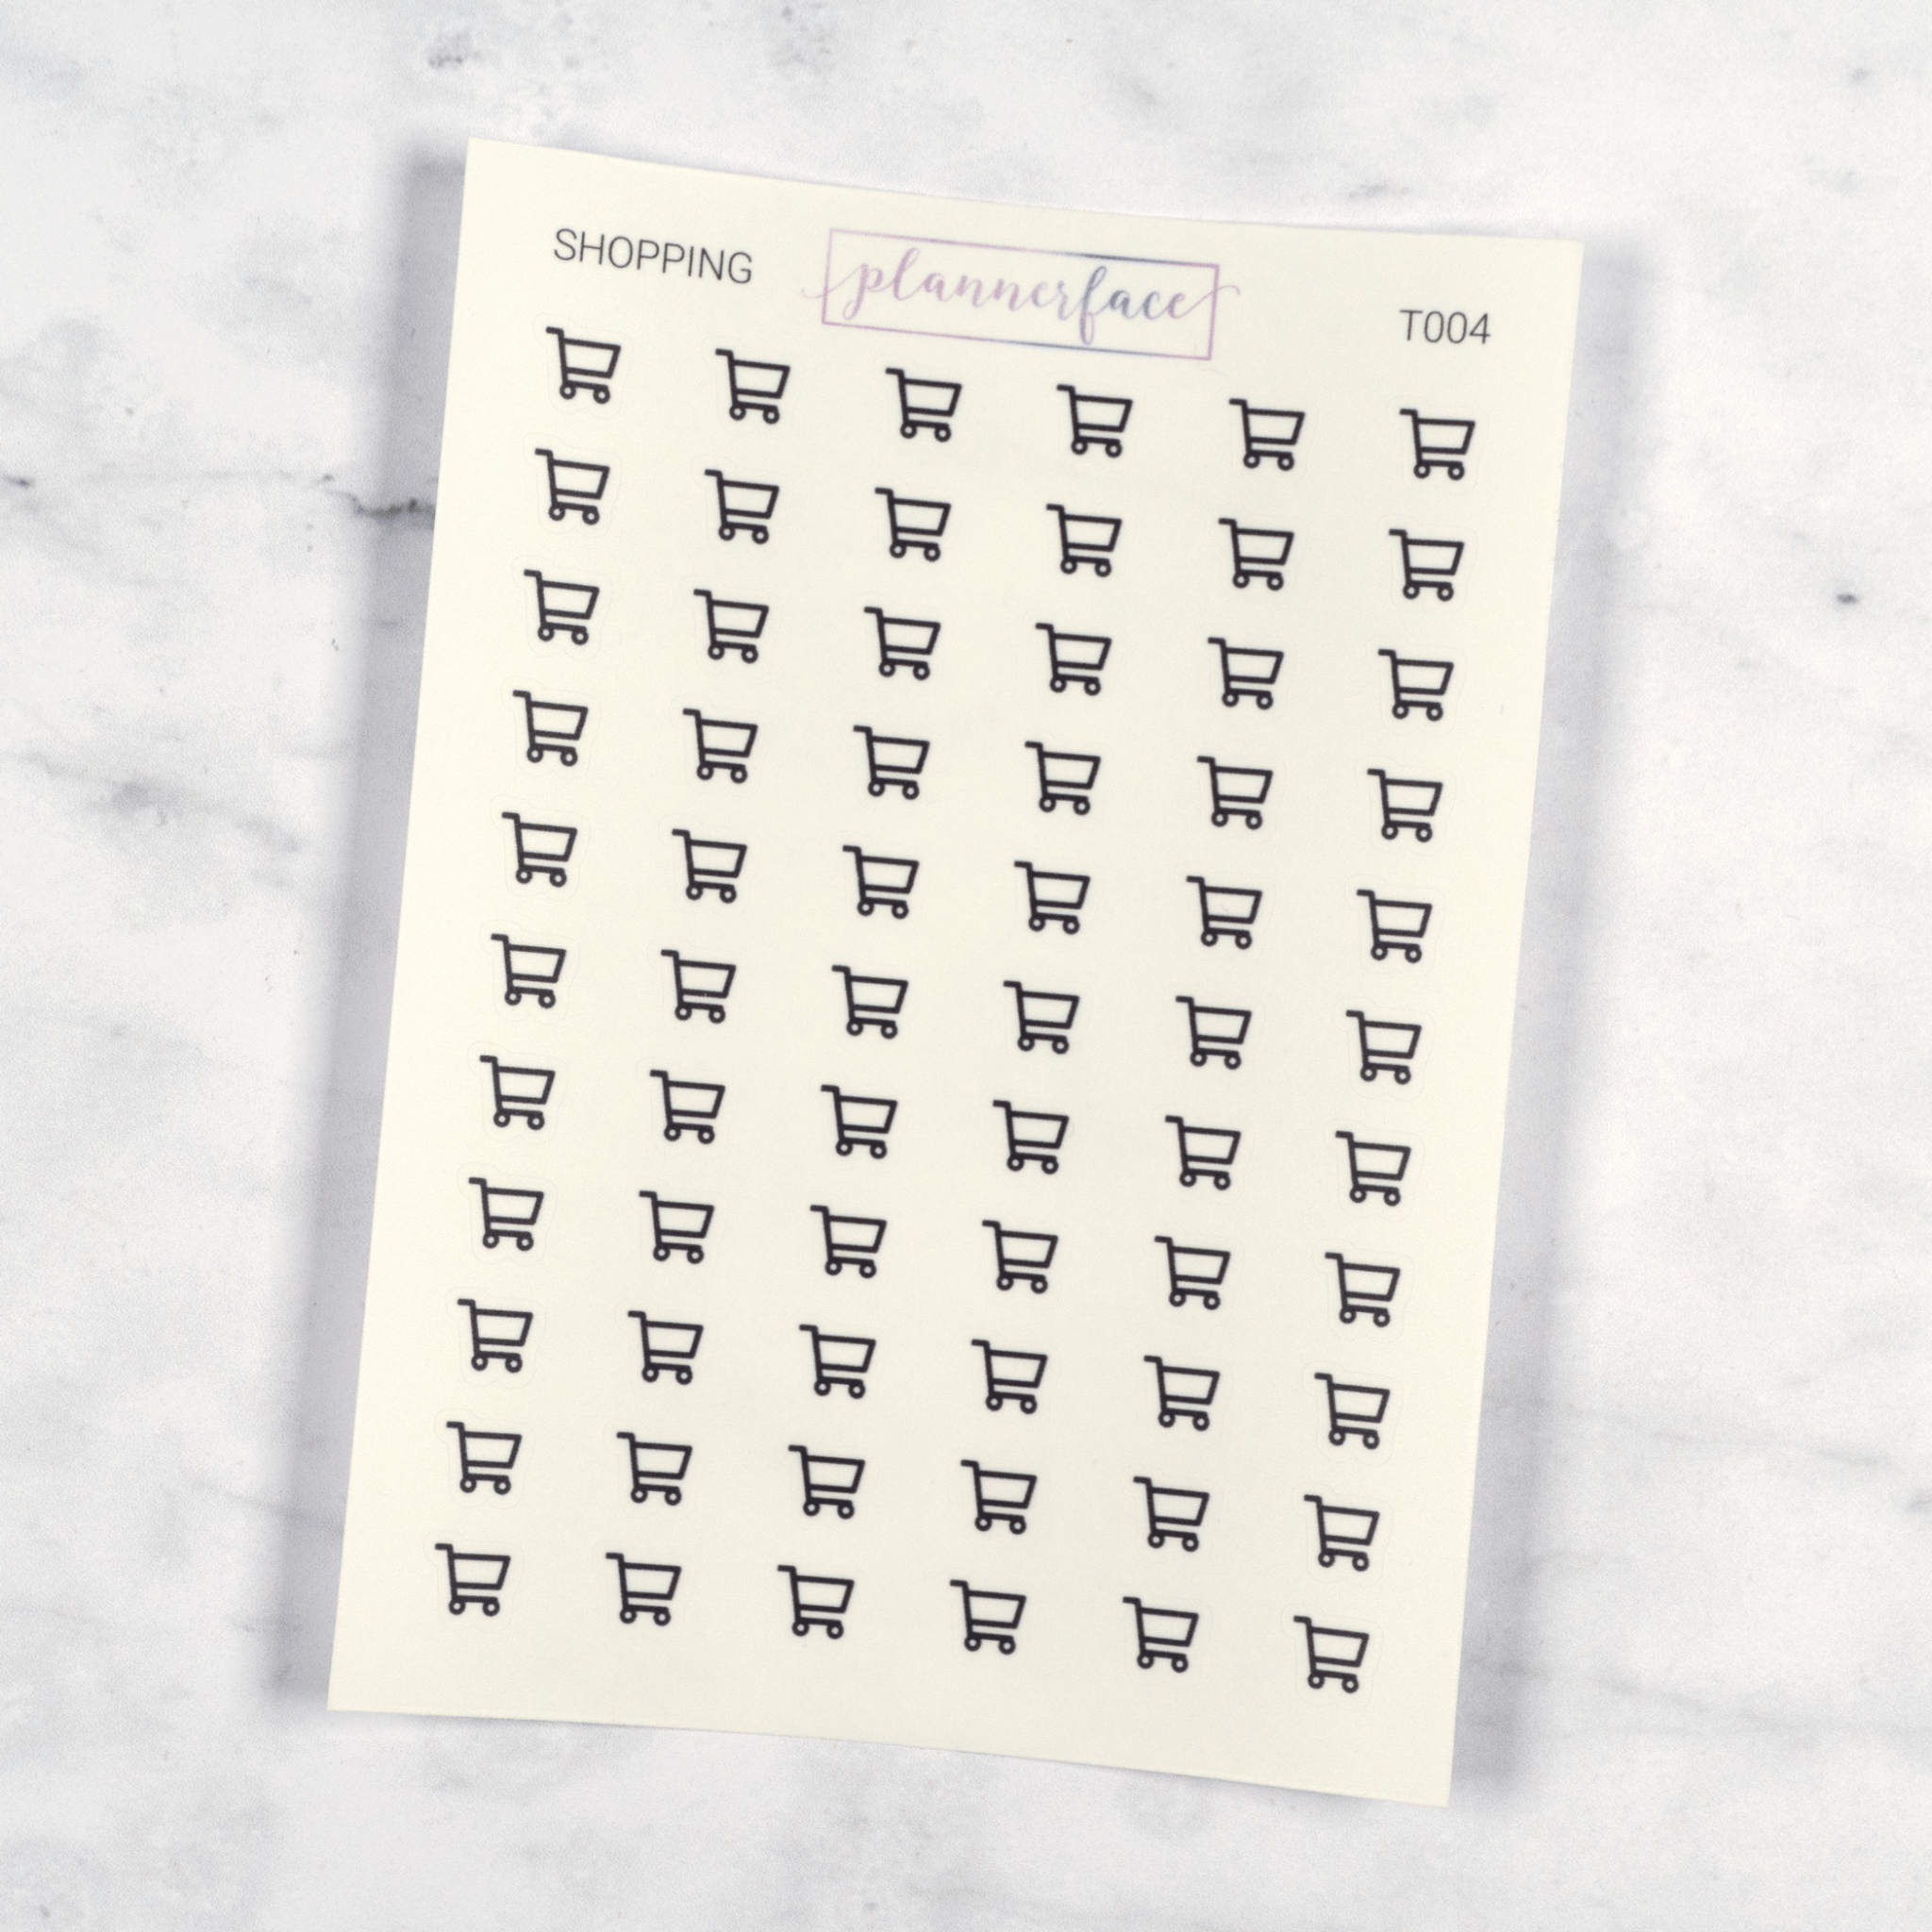 Shopping Transparent Icon Stickers by Plannerface